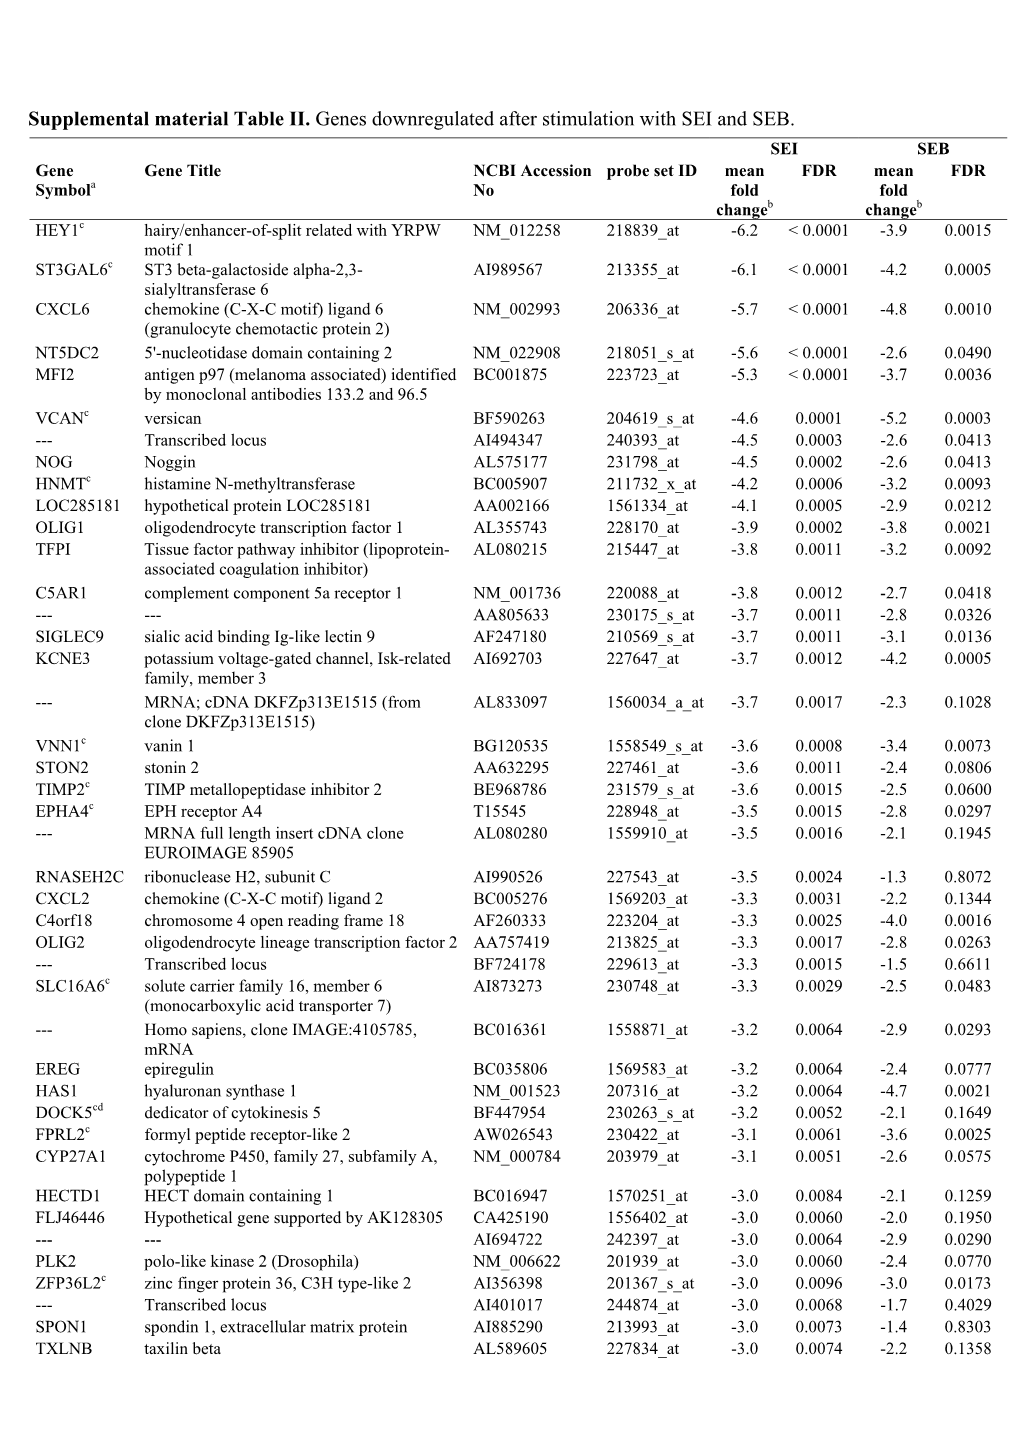 Supplemental Material Table II. Genes Downregulated After Stimulation with SEI and SEB